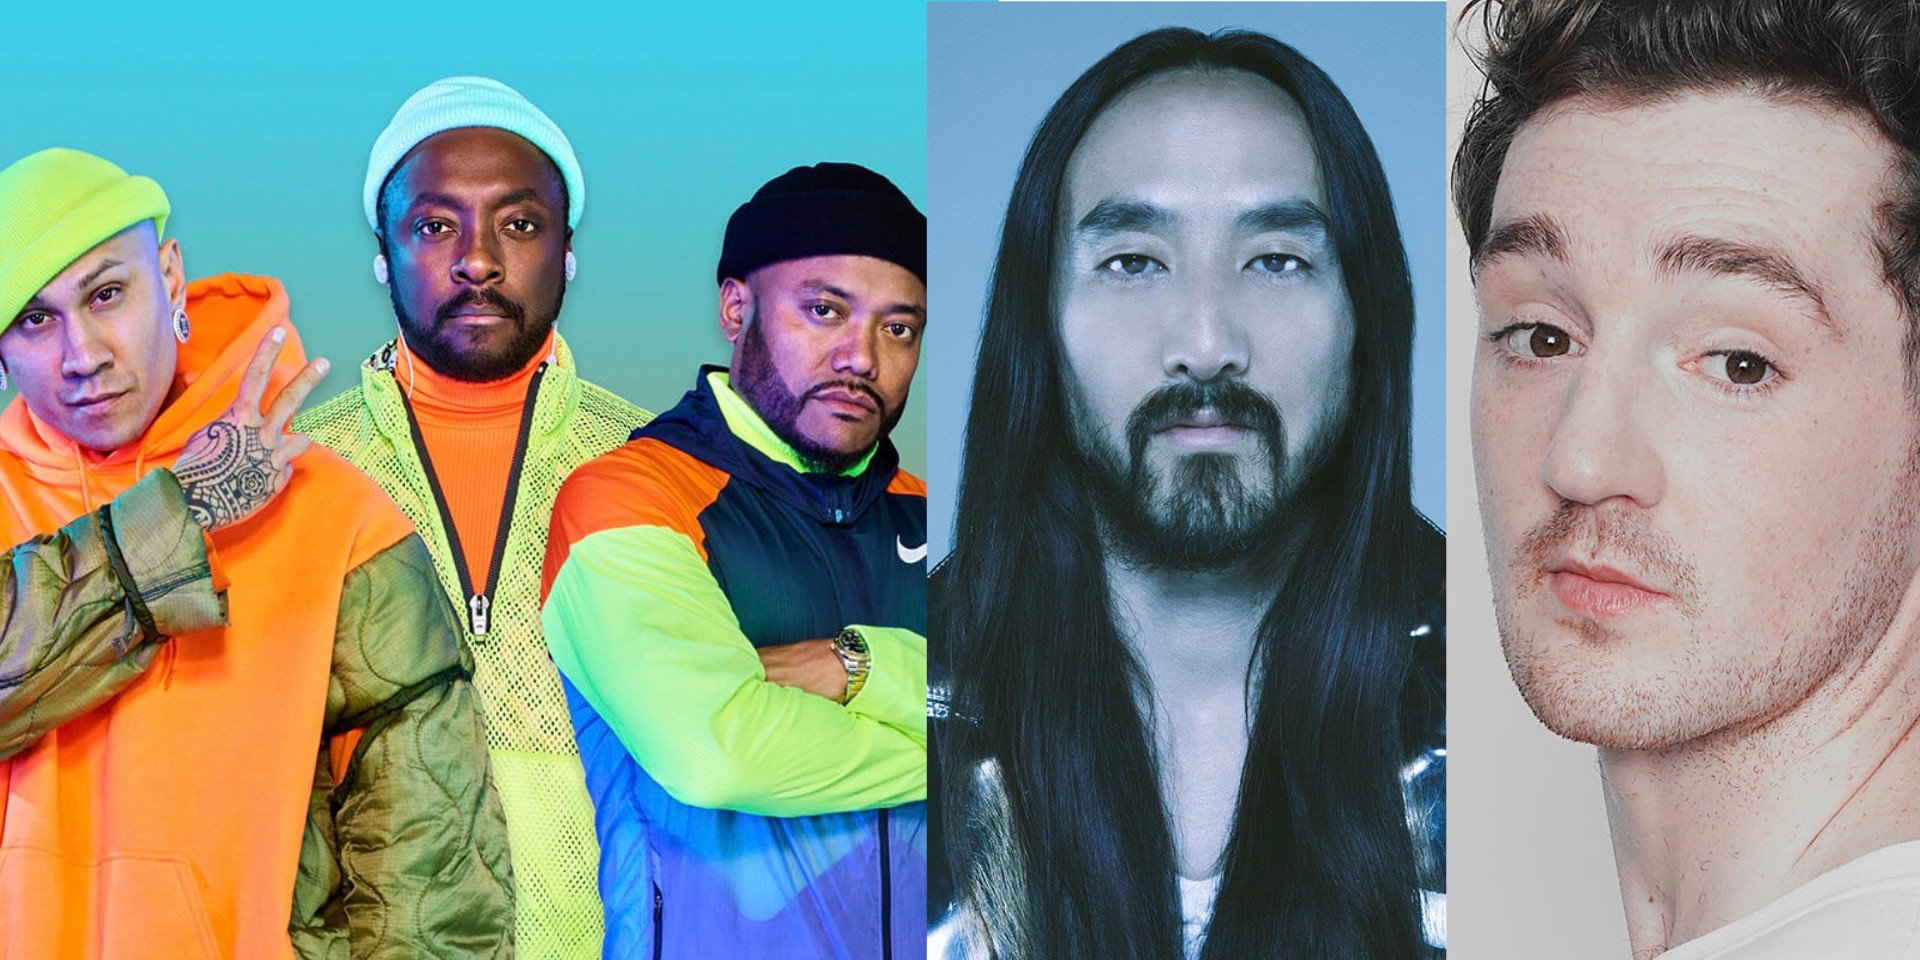 Supersonic 2020 cancellation announced - lineup included Black Eyed Peas, Clean Bandit, Steve Aoki, and more